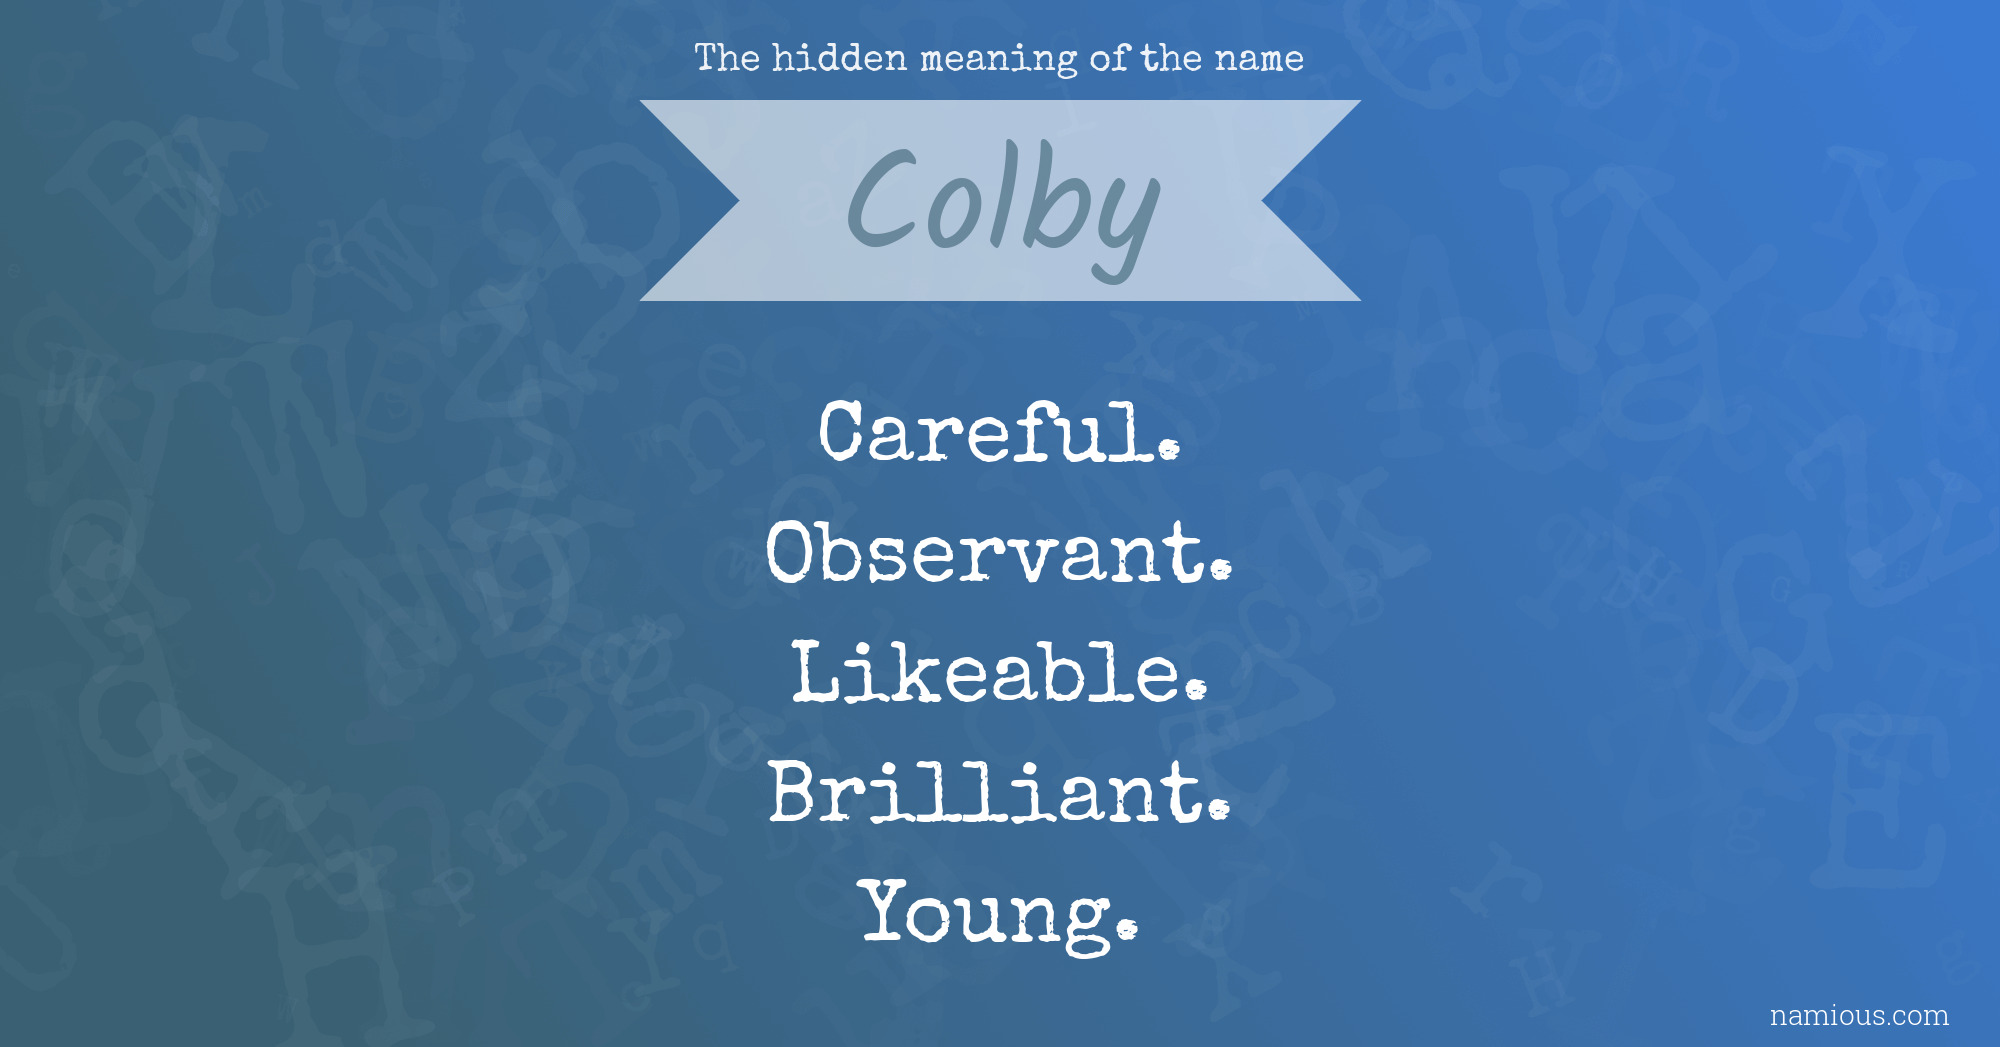 The hidden meaning of the name Colby